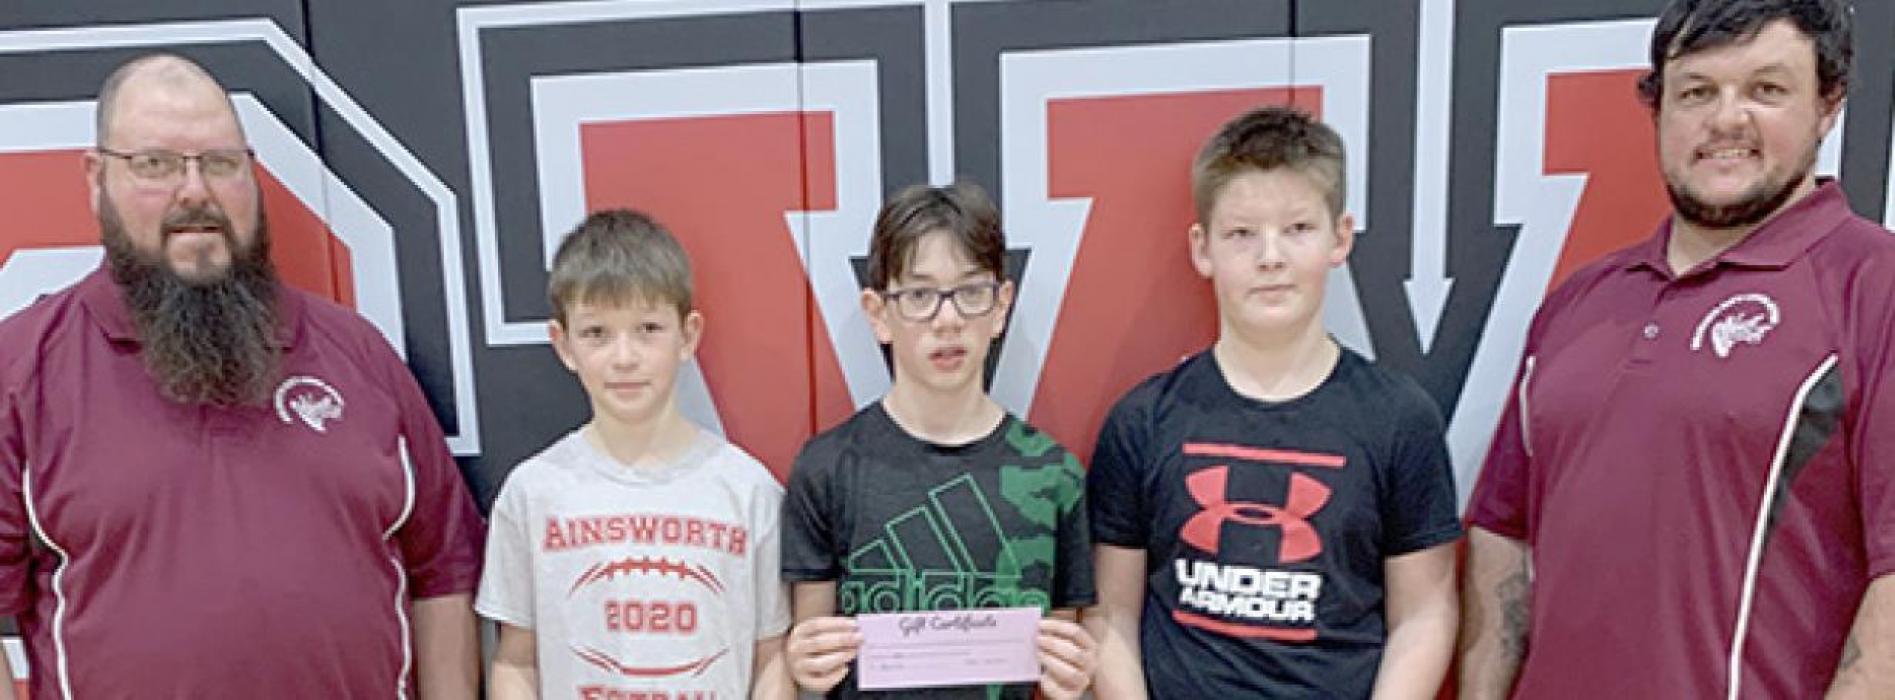 Jaxon Rucker (right) won the Boys 12-13 Year Old Division with Bear Rea (center) taking second place and Bateson Raymond (left) placing third.